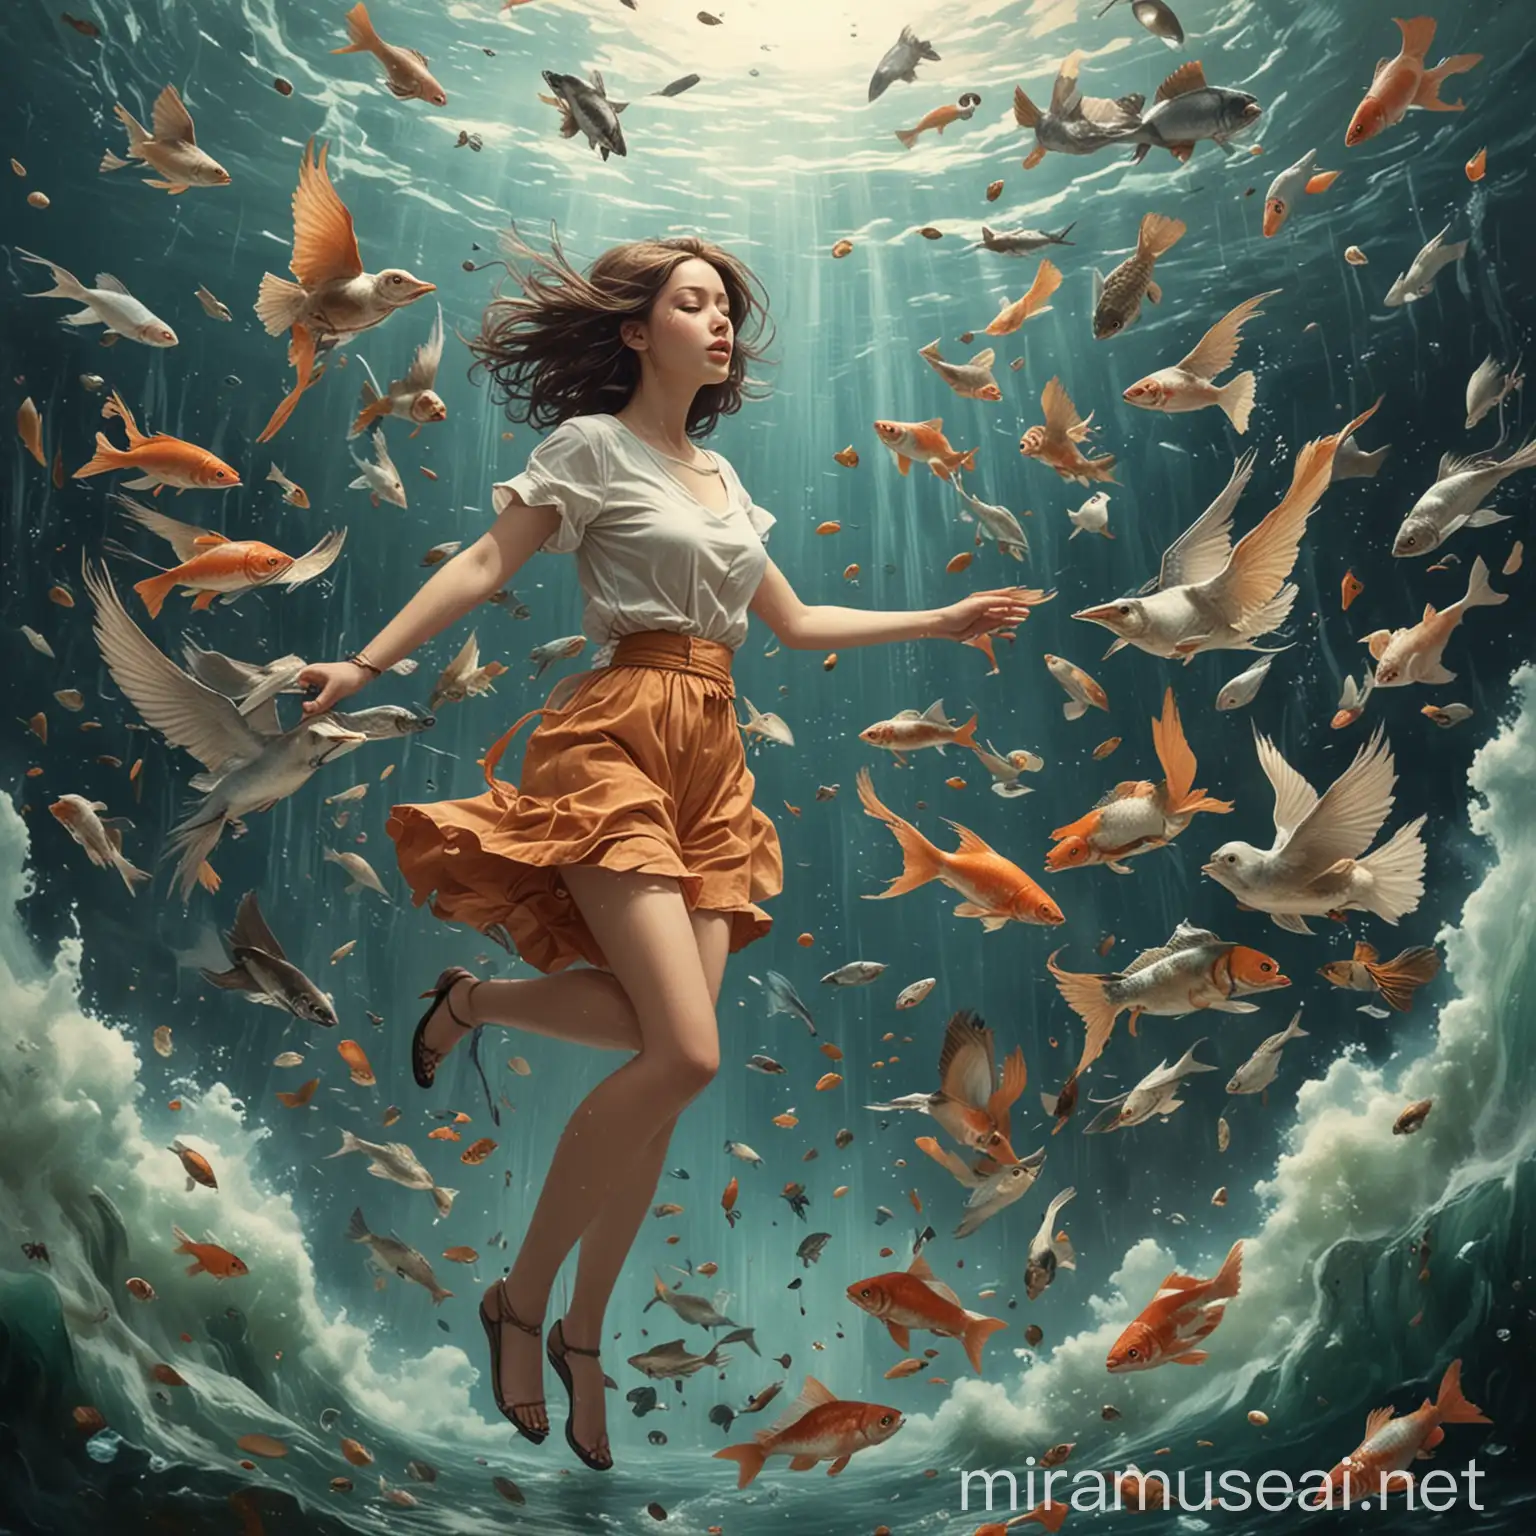 Girl Soul Flying with Birds and Fish in Harmony